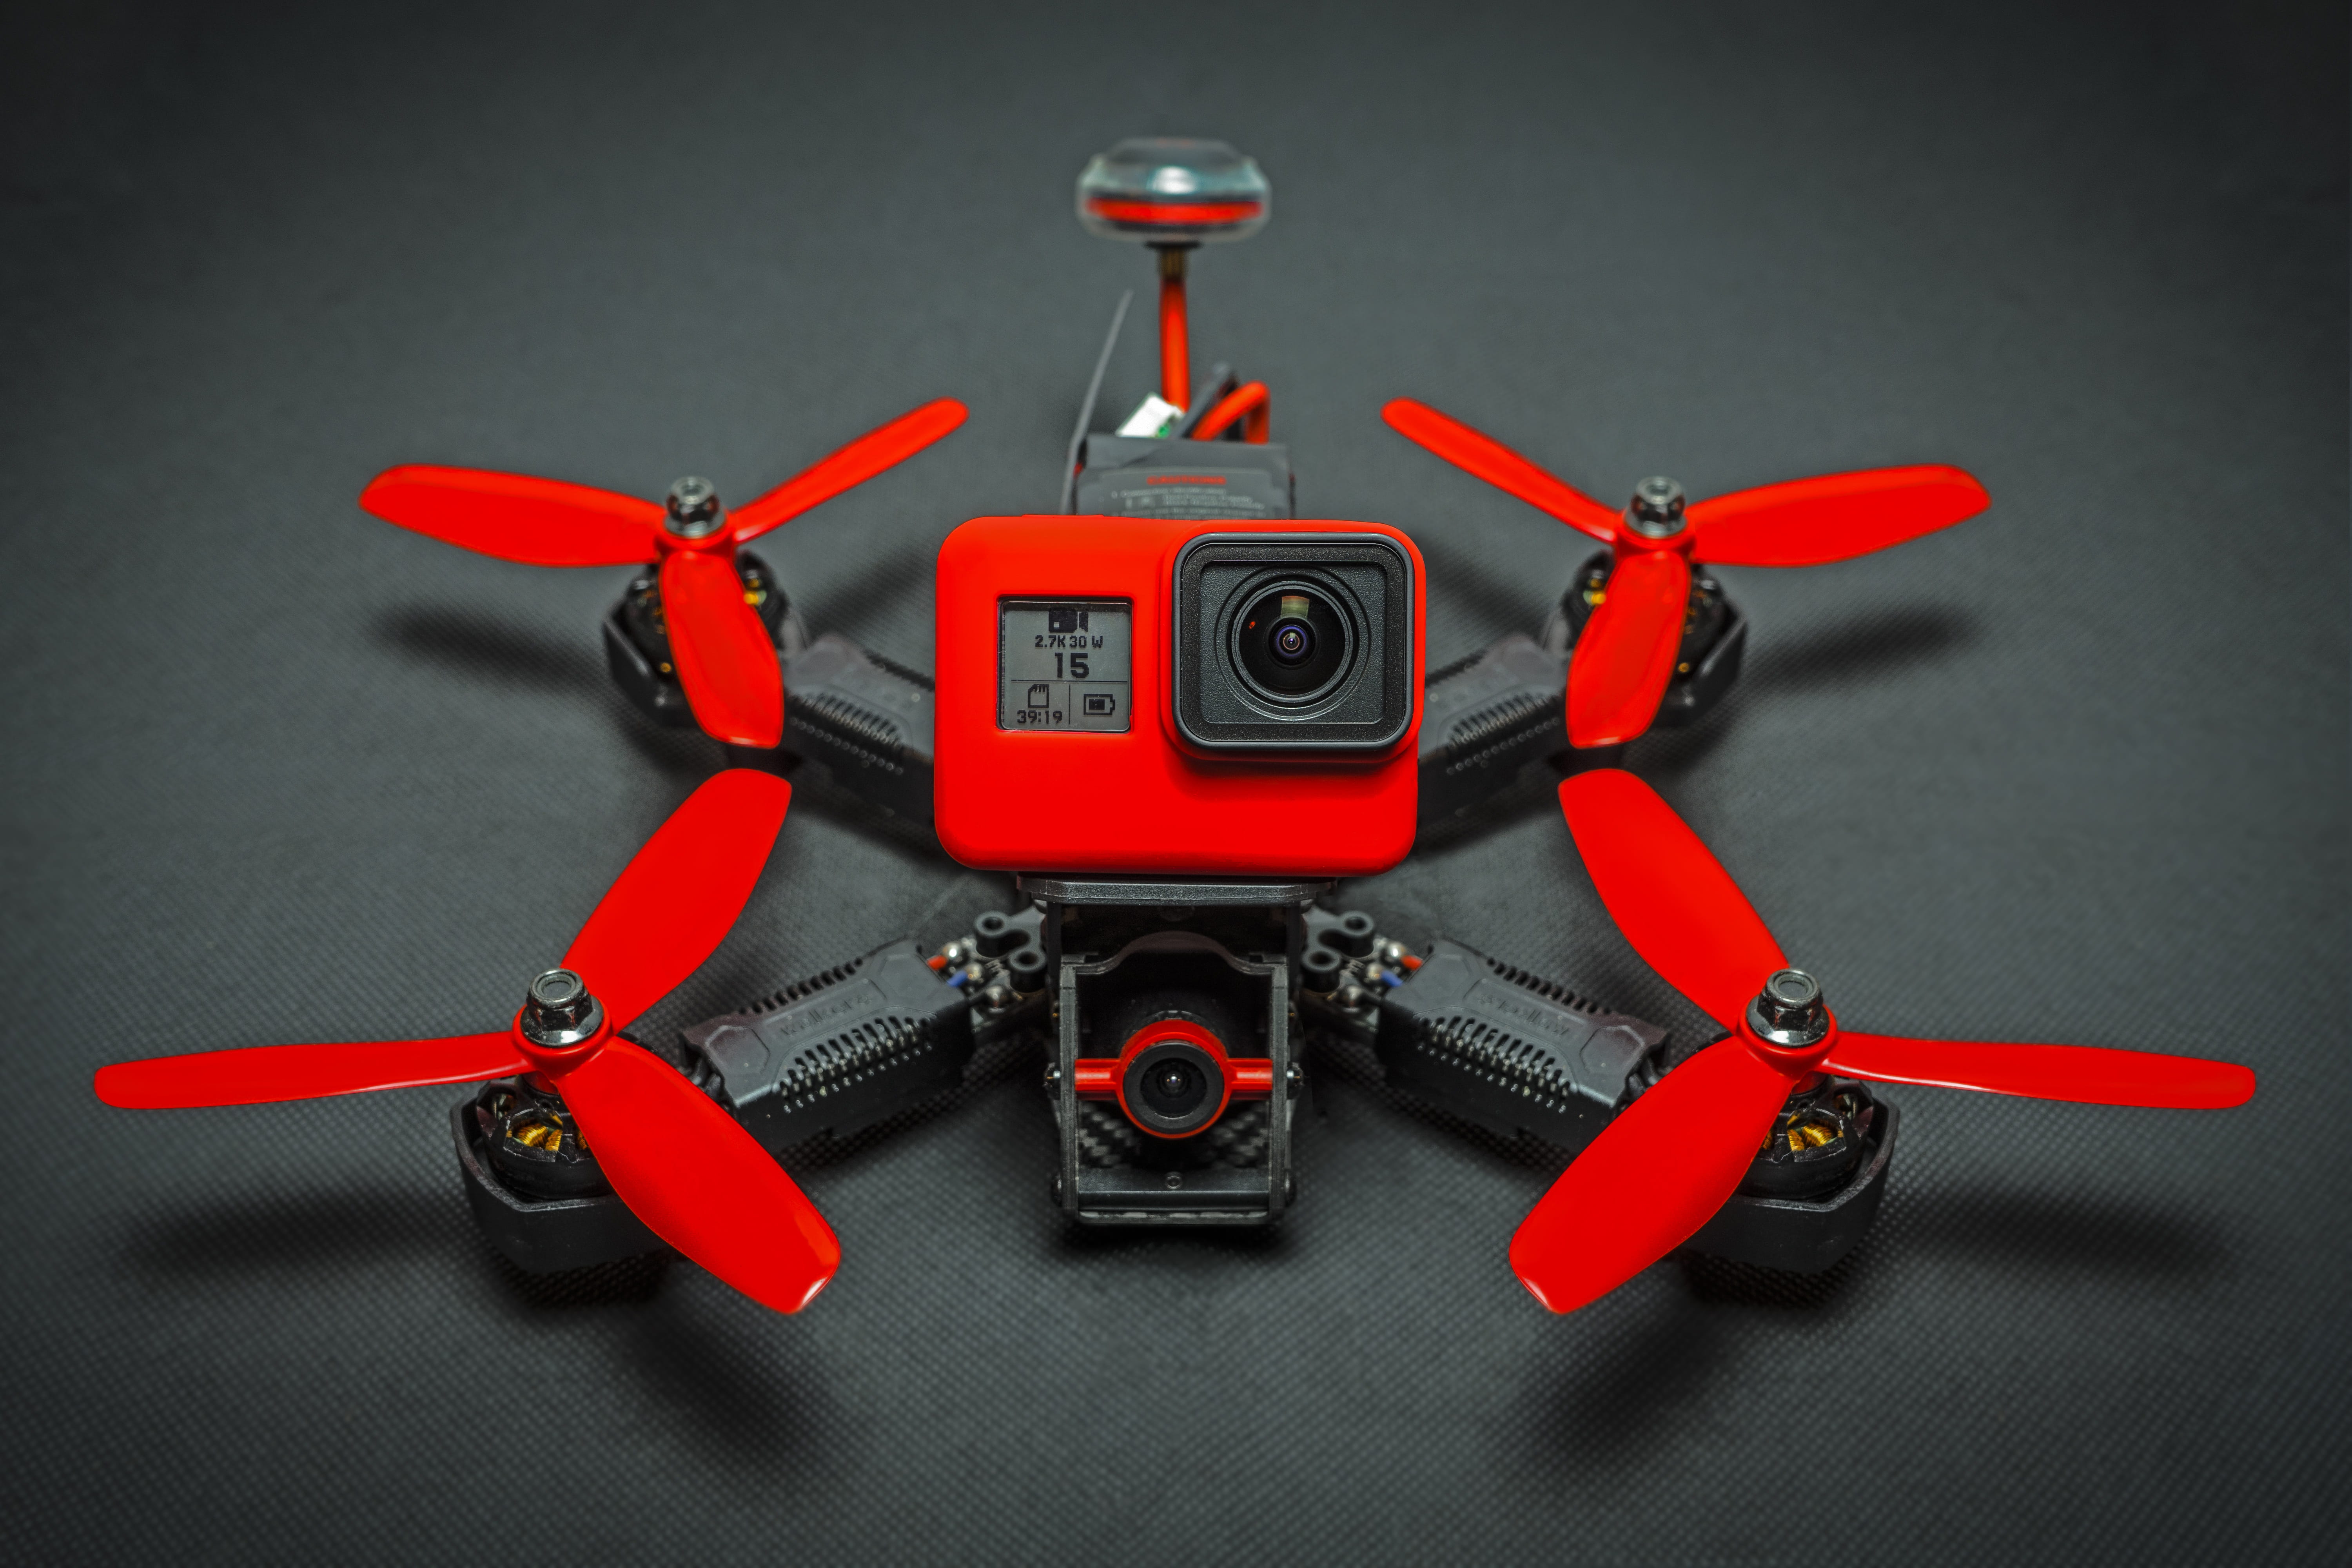 drone, quadrocopter, hobby, camera, flying object, technology